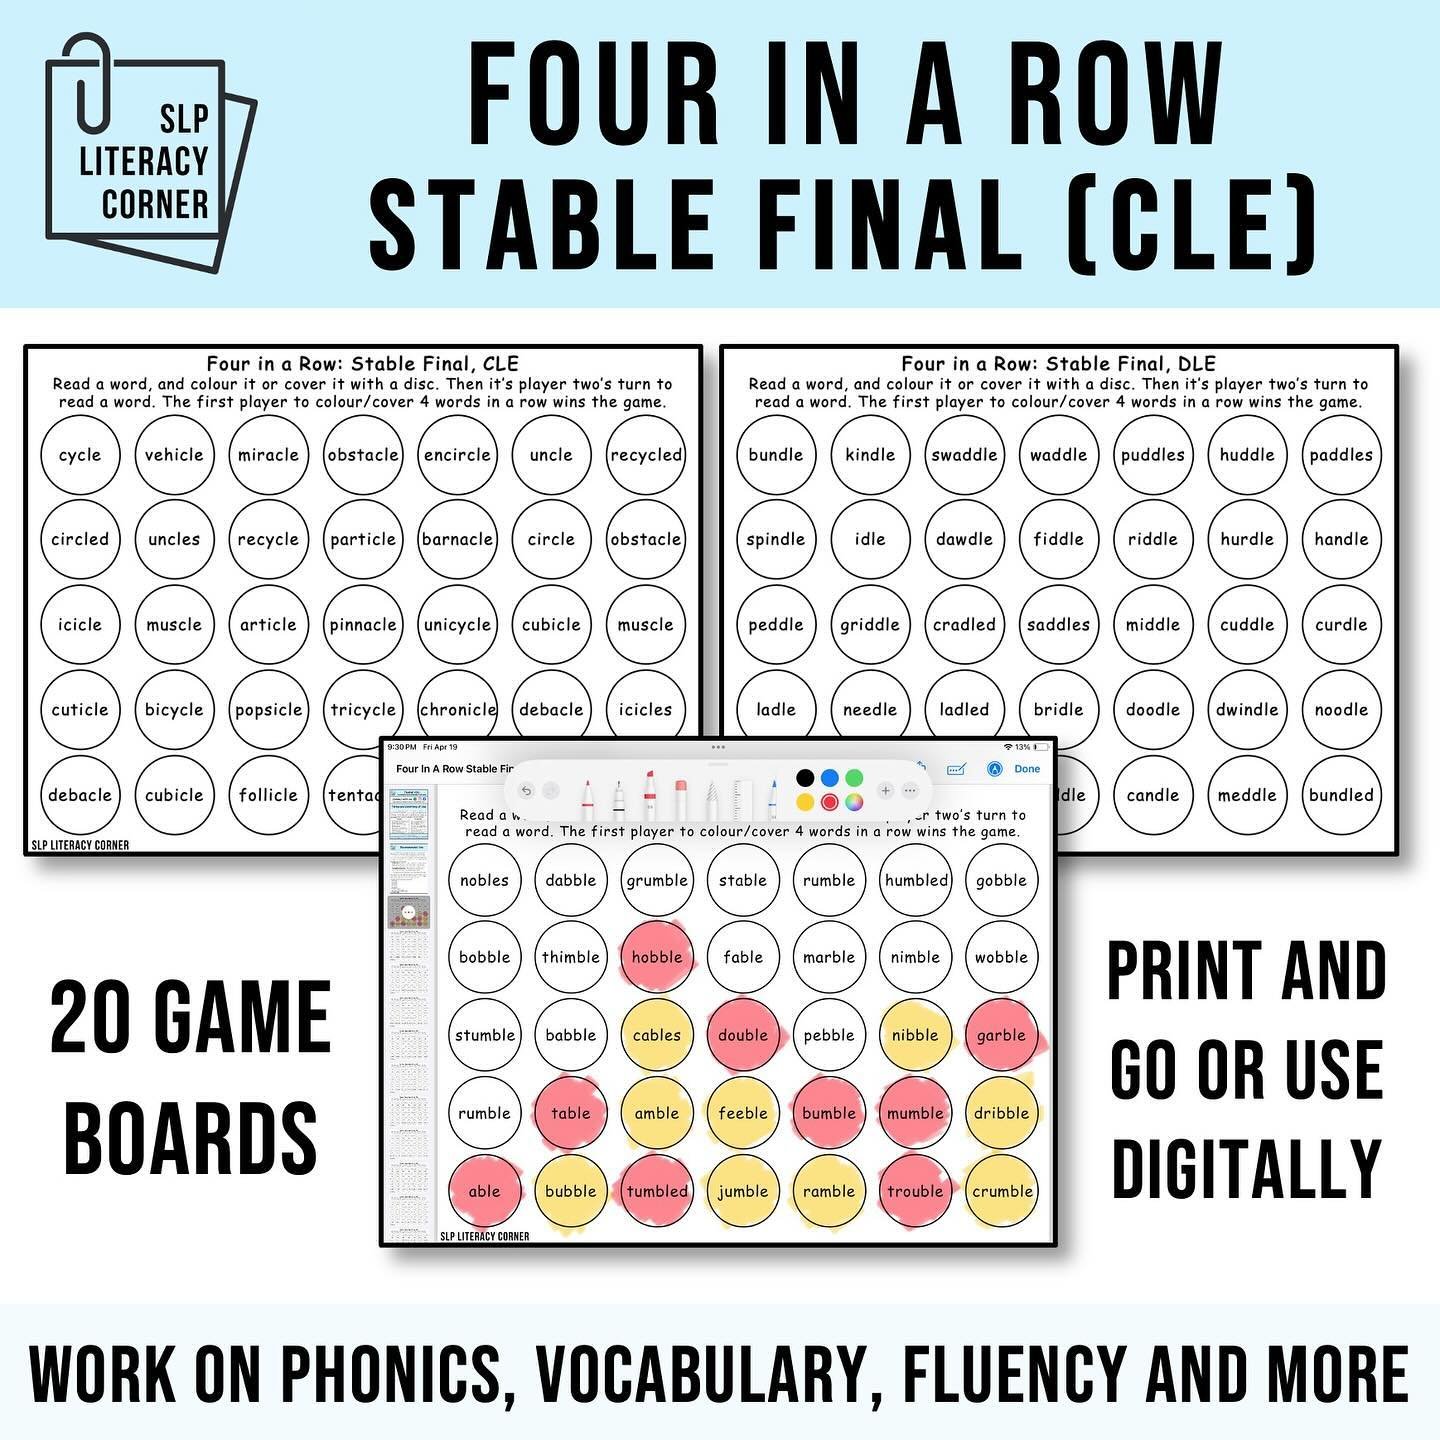 ✨NEW✨ Four in a Row Stable Final CLE

50% off until Tuesday, April 23rd!

🤩 Comment GAMES if you want the link to these no-prep game boards!

⭐️ Four in a row&nbsp;is a fun game to play while targeting multiple literacy skills including:&nbsp;phonic